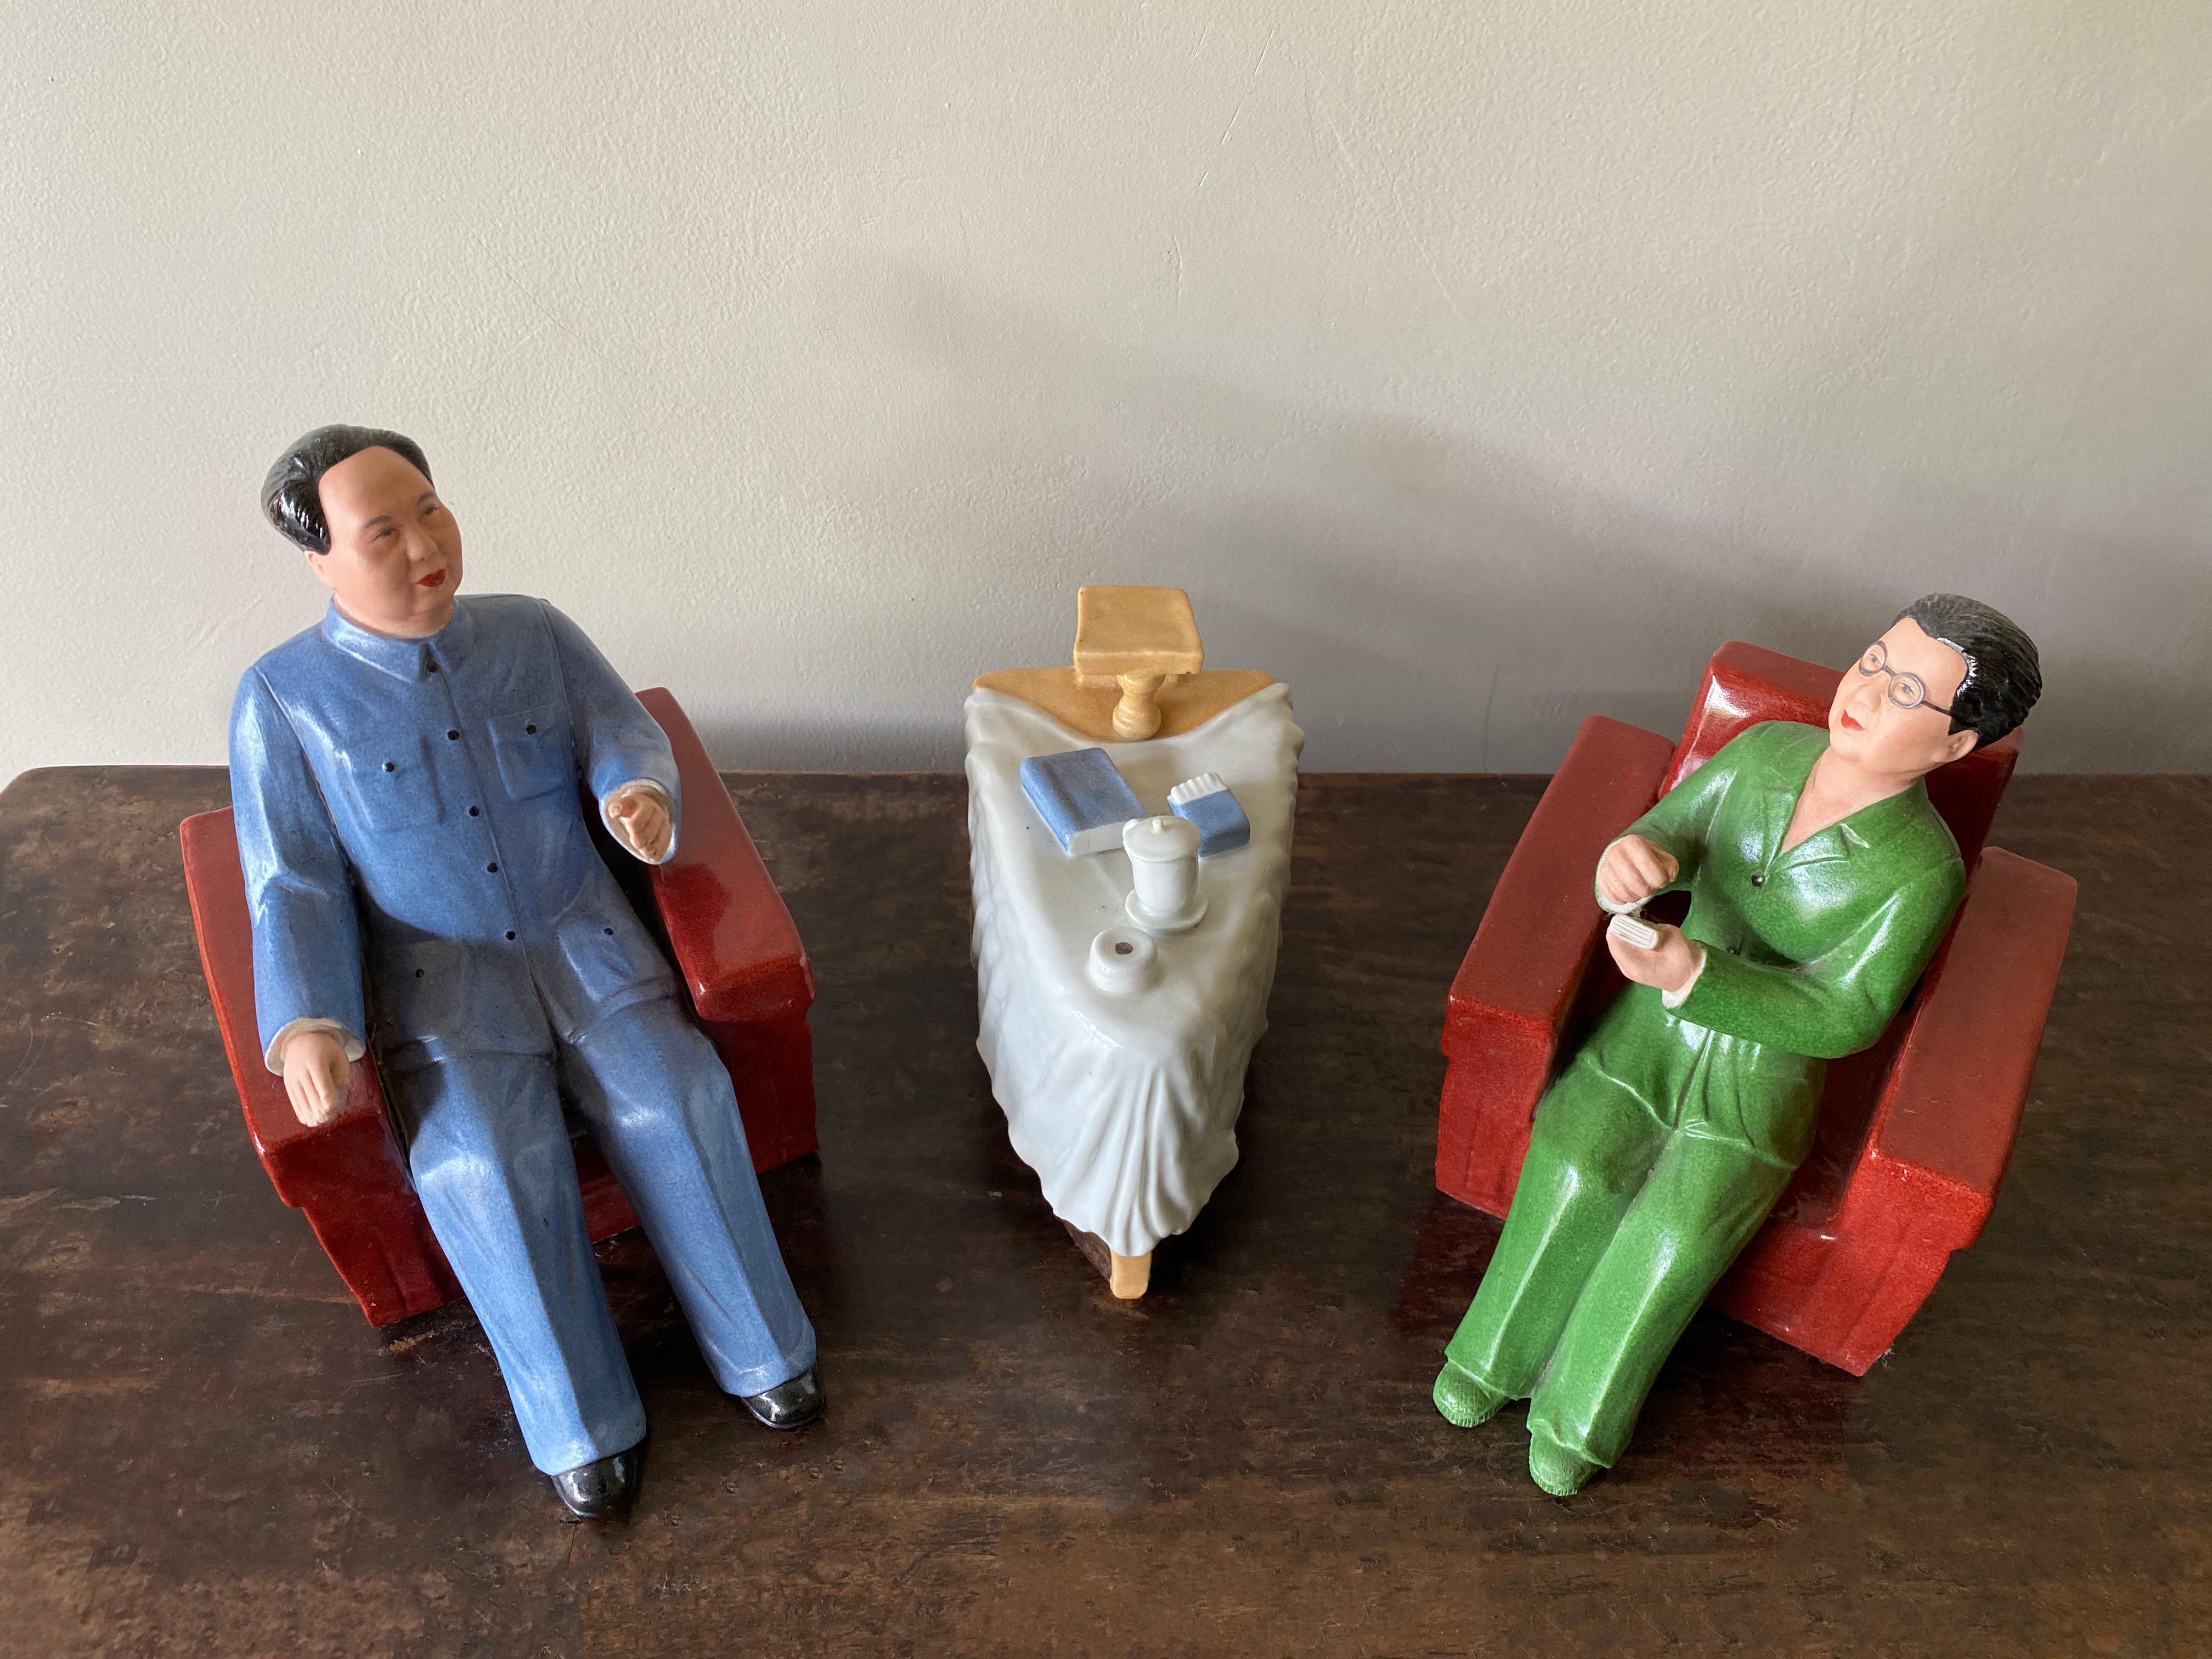 These detailed ceramic figures of chairman mao & madame were hand-crafted and painted. They are cultural revolution memorabilia dating to the early 1970s.

Dimensions: Each figure and chair are 14,5cm wide, 22cm high and 13.5cm deep.